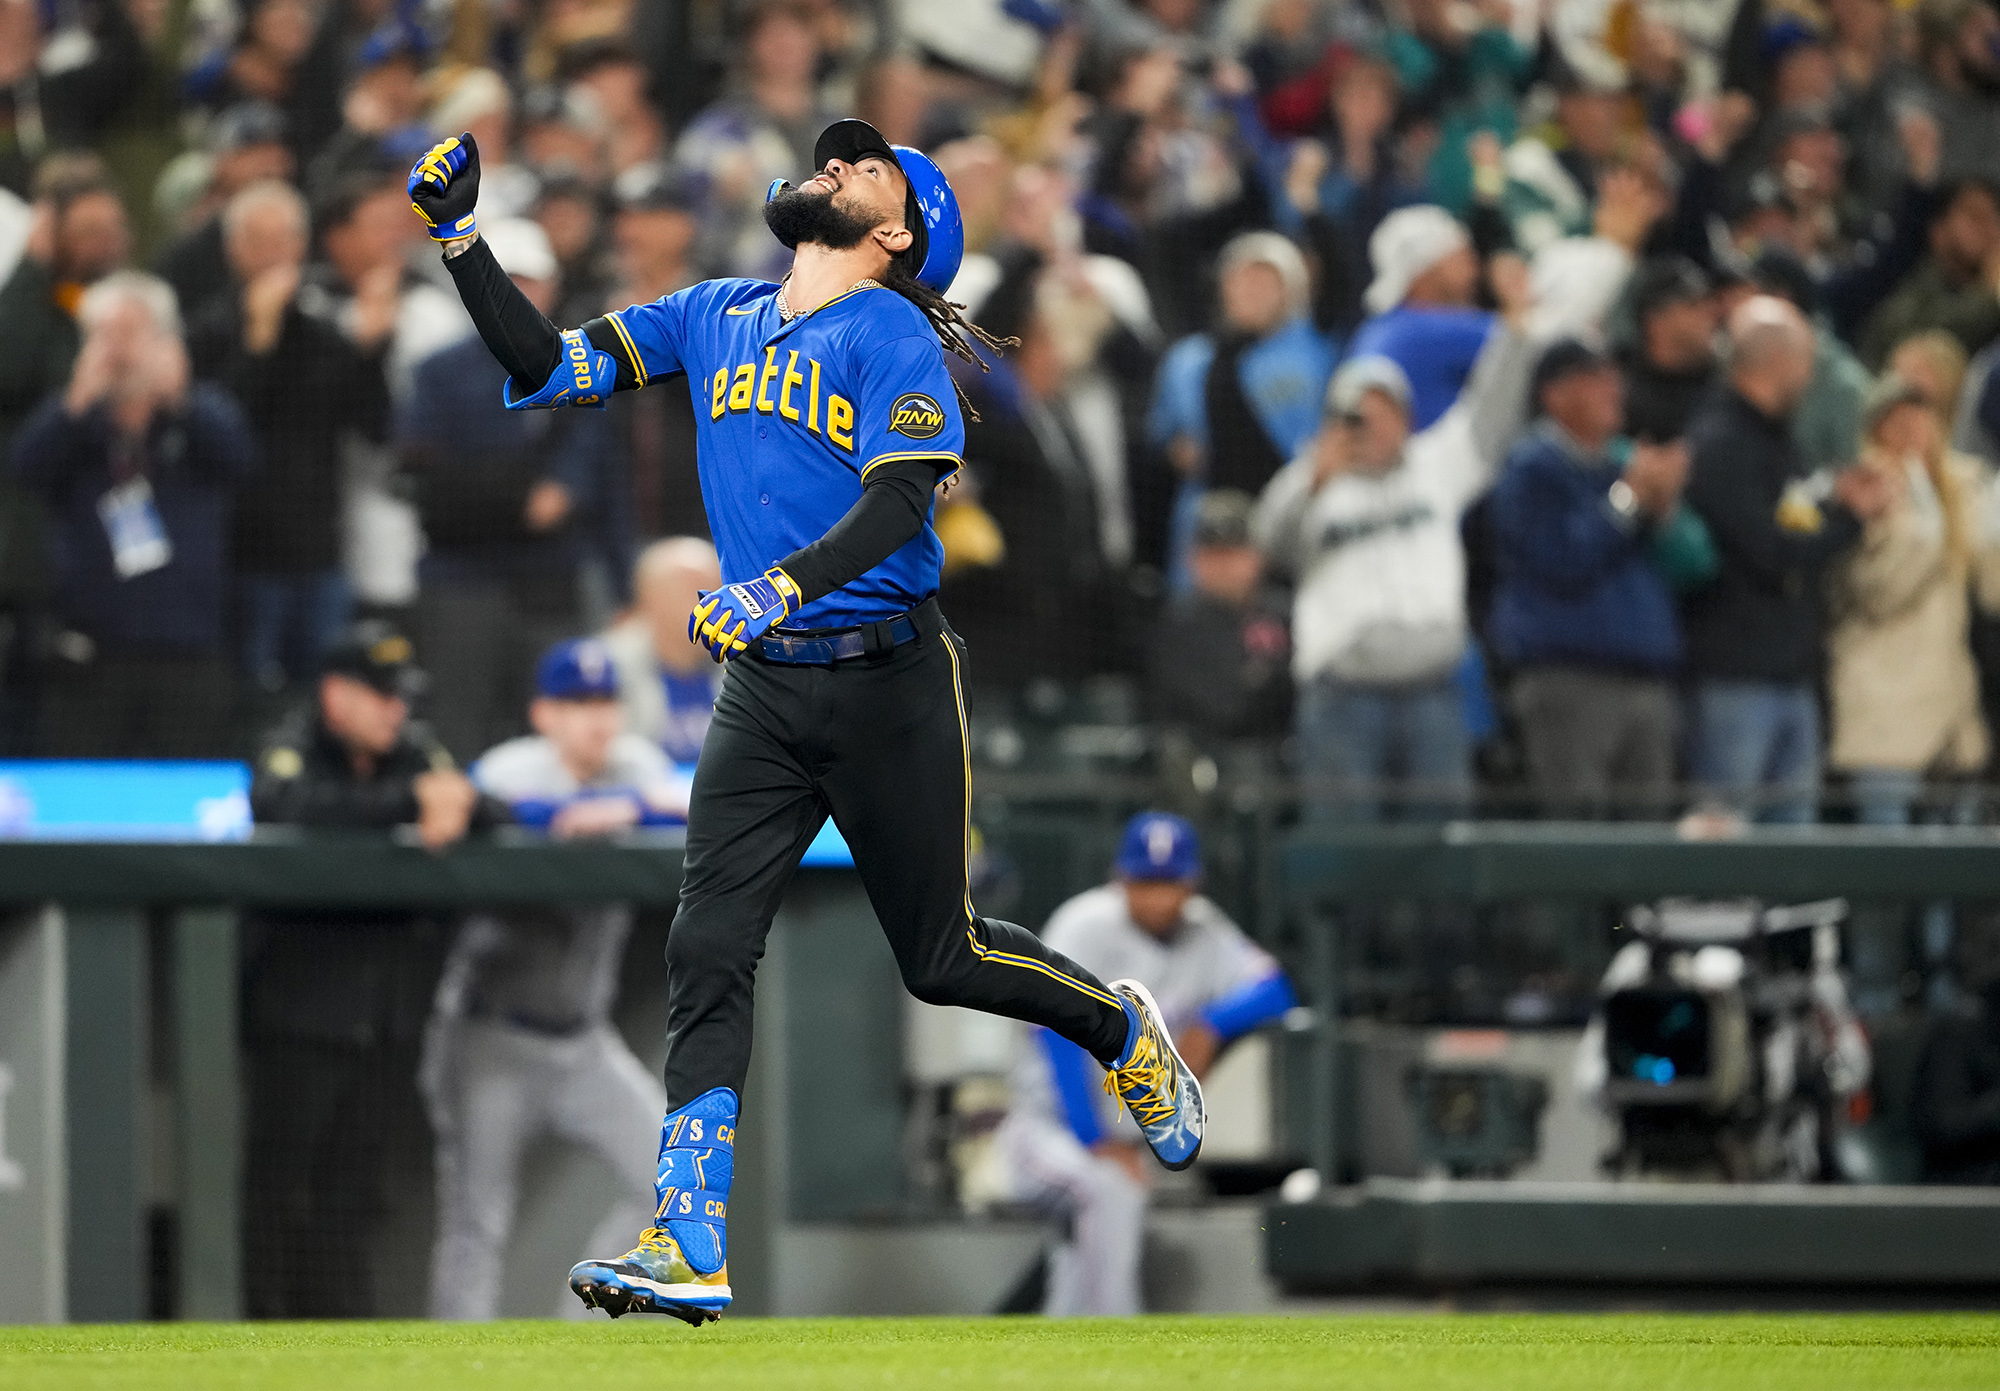 Crawford's grand slam leads Mariners to 8-0 win over Rangers - The Columbian